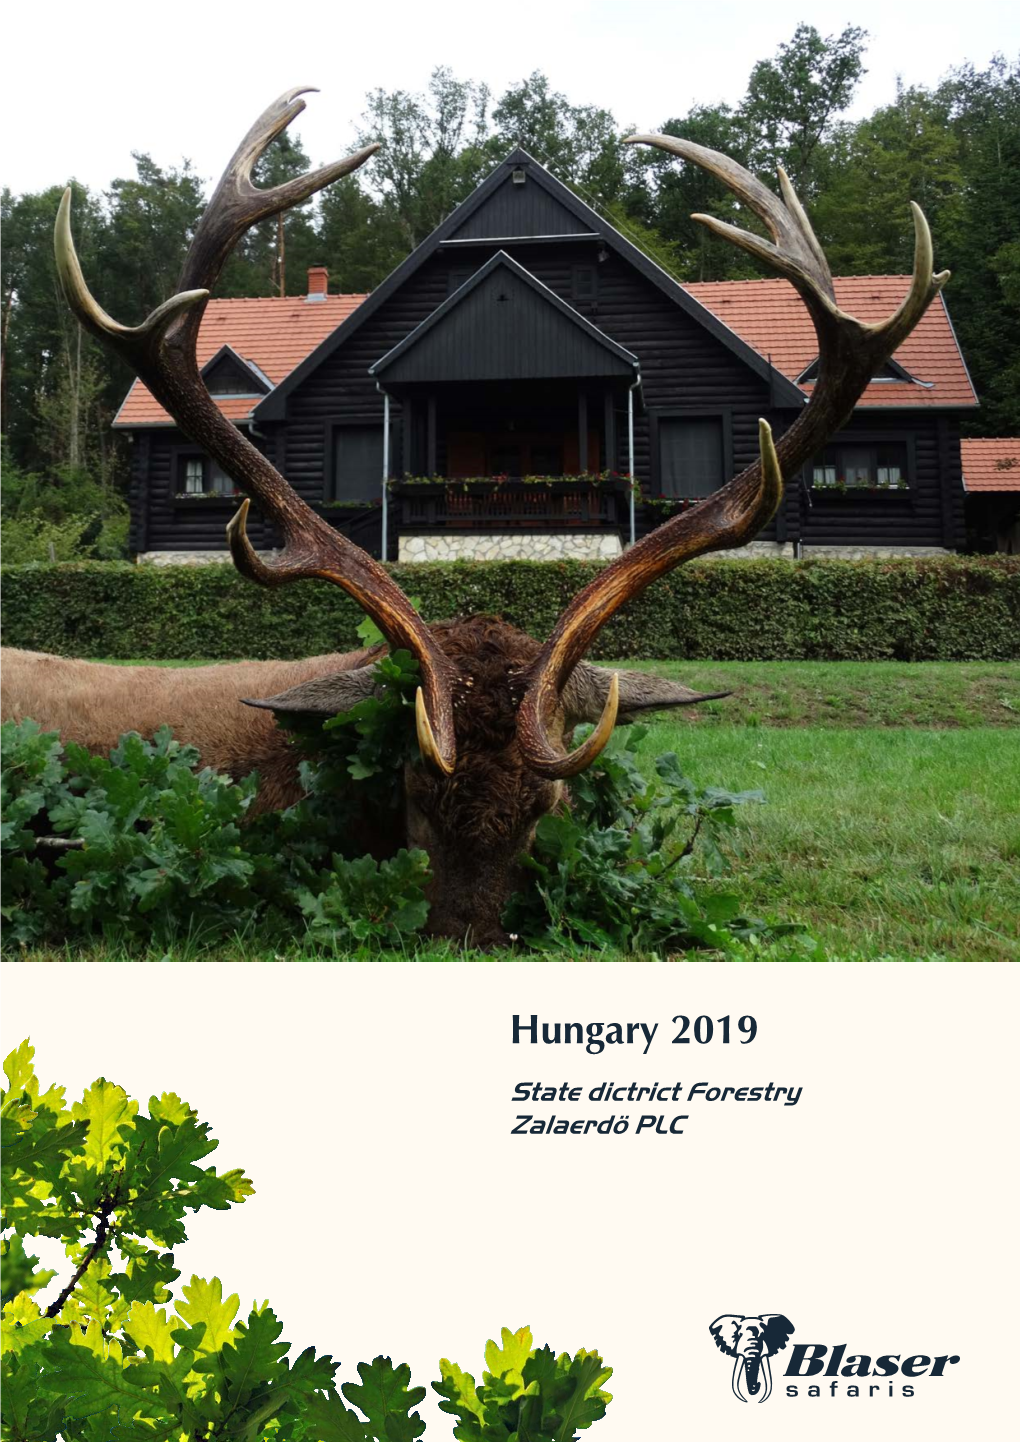 Hungary 2019 State Dictrict Forestry Zalaerdö PLC